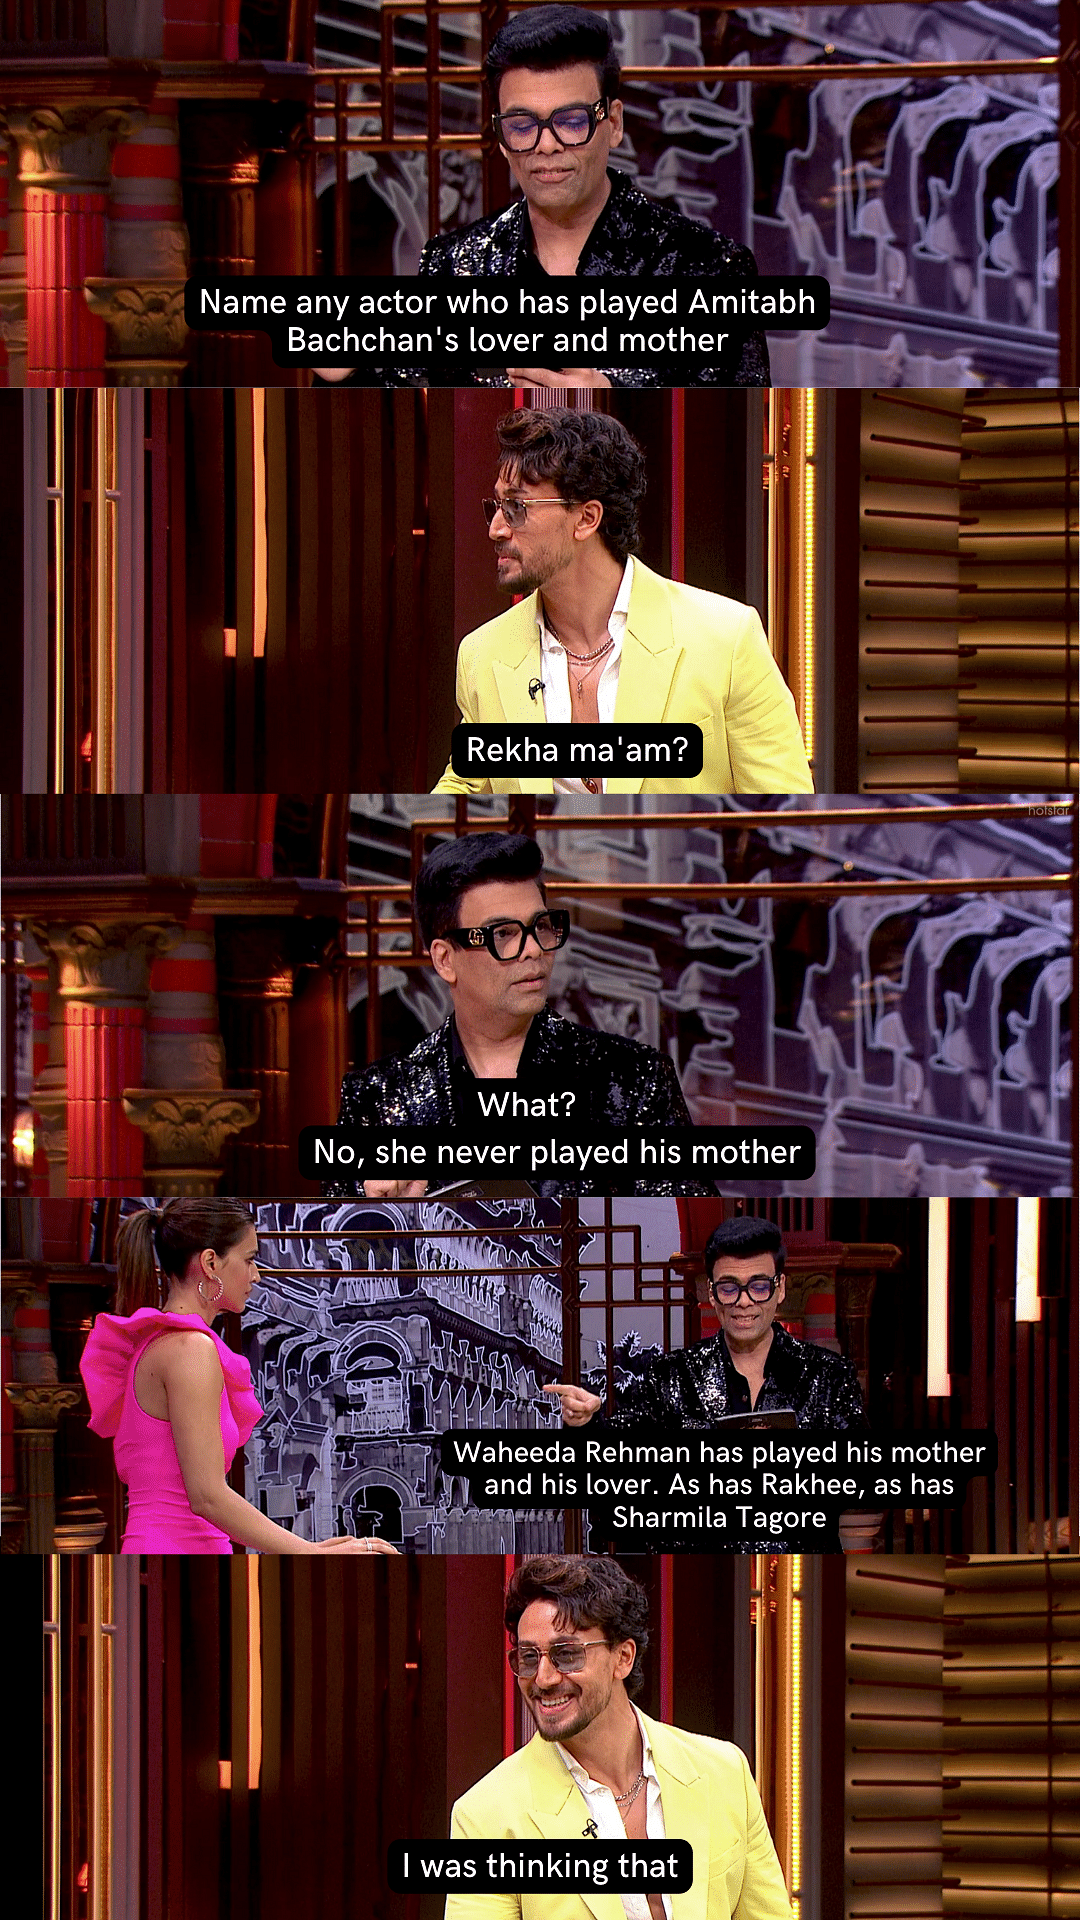 Karan Johar and Kriti Sanon's talking about Student of the Year and Lust Stories were intresting to say the least.